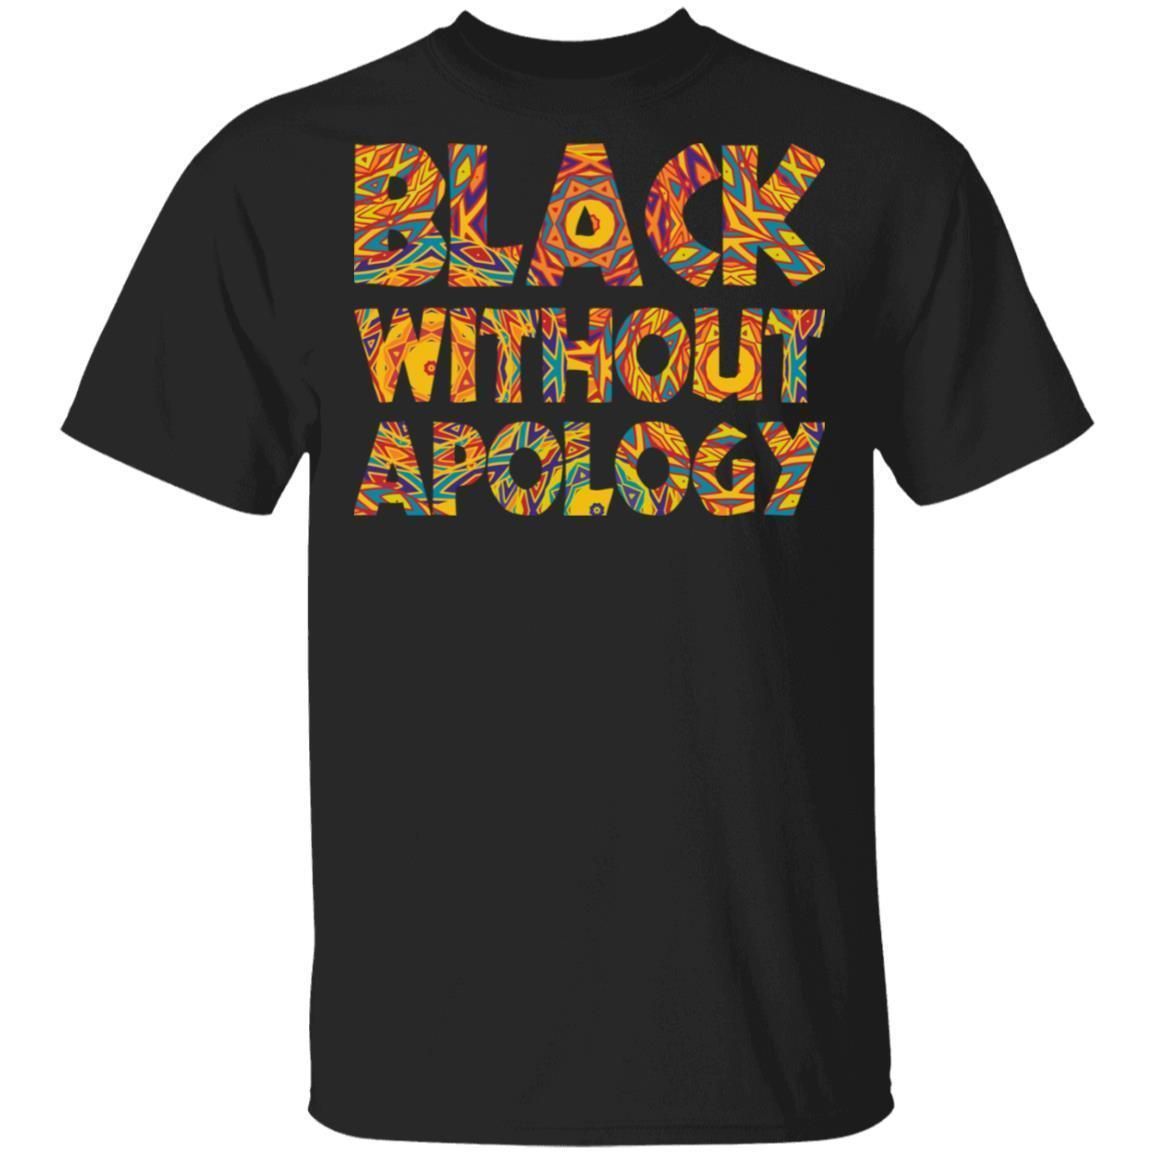 Without Apology T-shirt